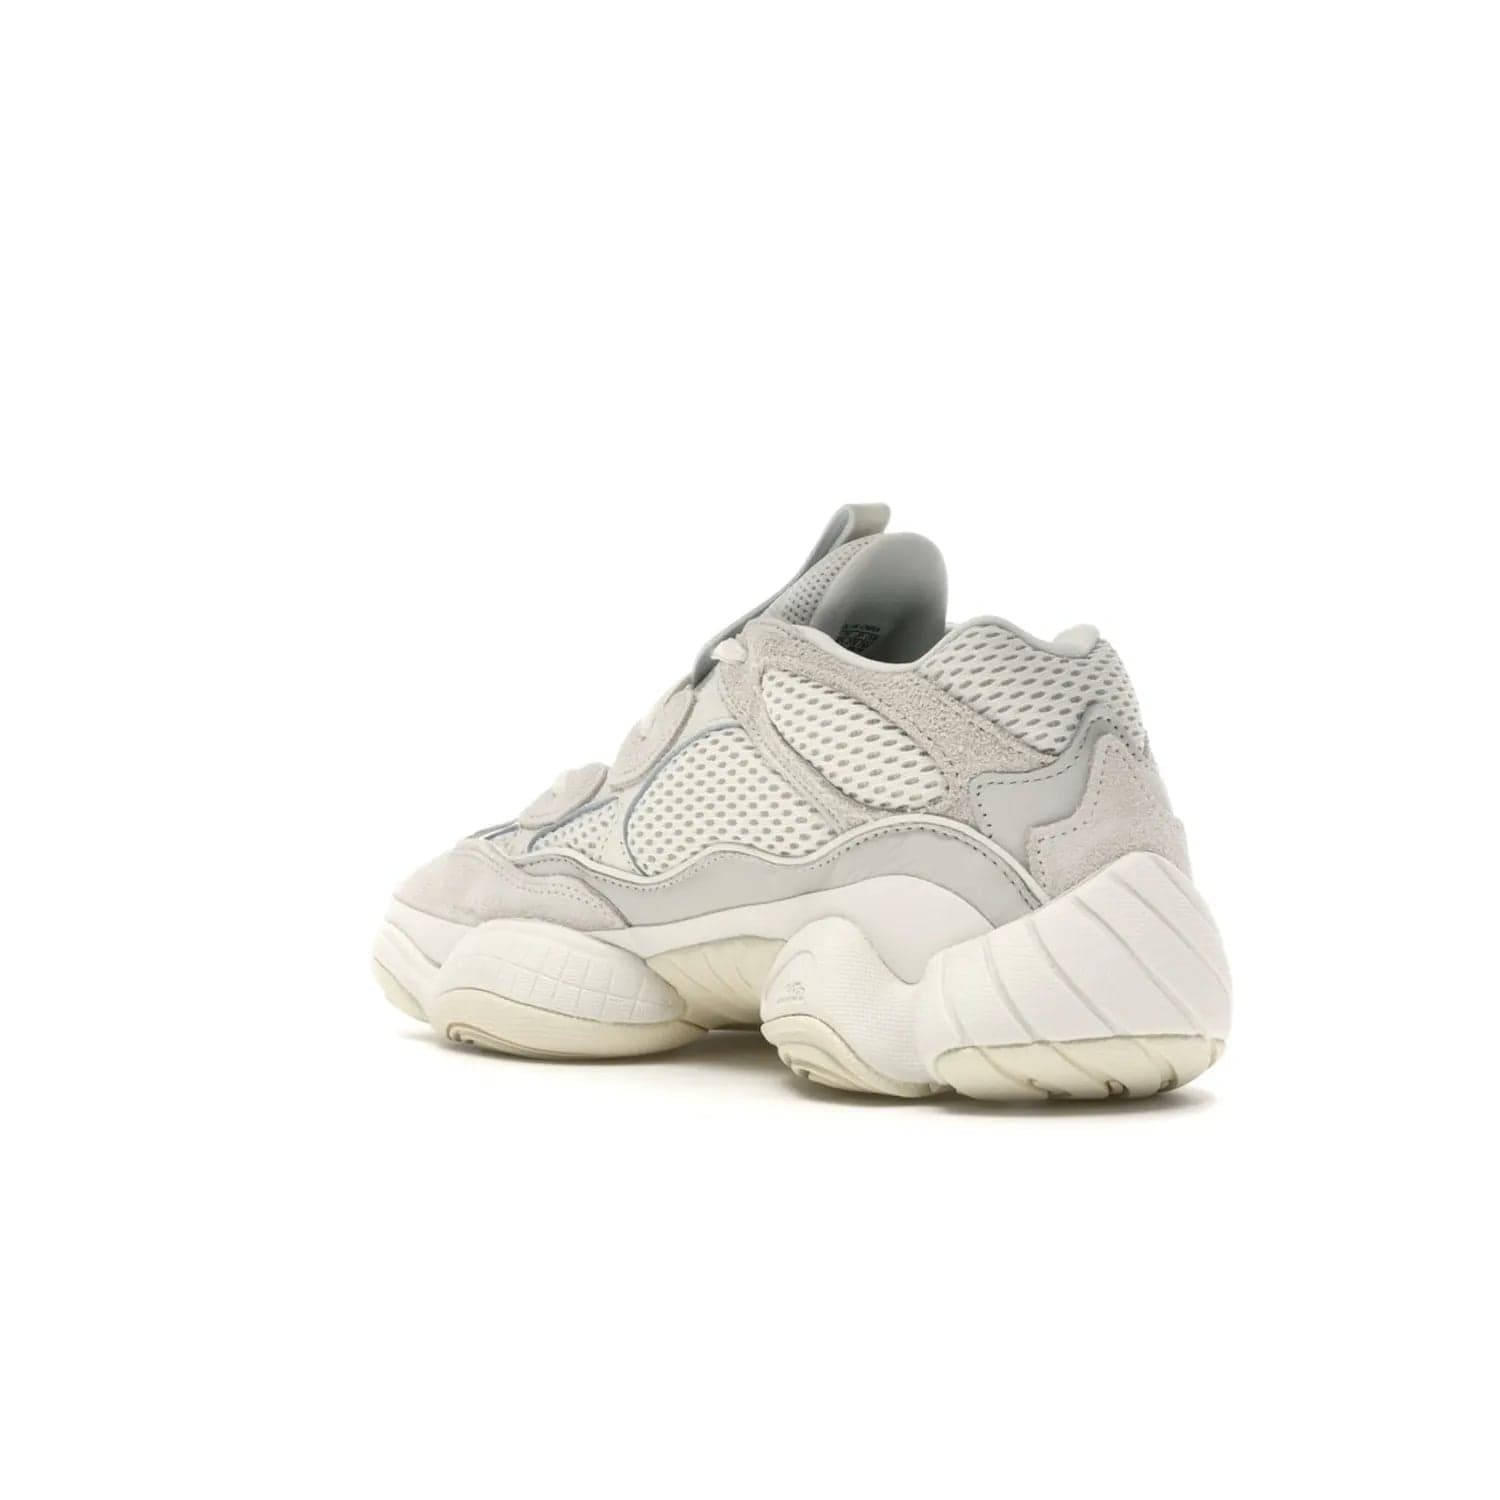 adidas Yeezy 500 Bone White - Image 24 - Only at www.BallersClubKickz.com - Classic look perfect for any sneaker collection. The adidas Yeezy 500 "Bone White" blends a white mesh upper with suede overlays & a chunky midsole inspired by the Adidas KB3. Complimented by a tonal-cream outsole, this timeless style is a must-have.